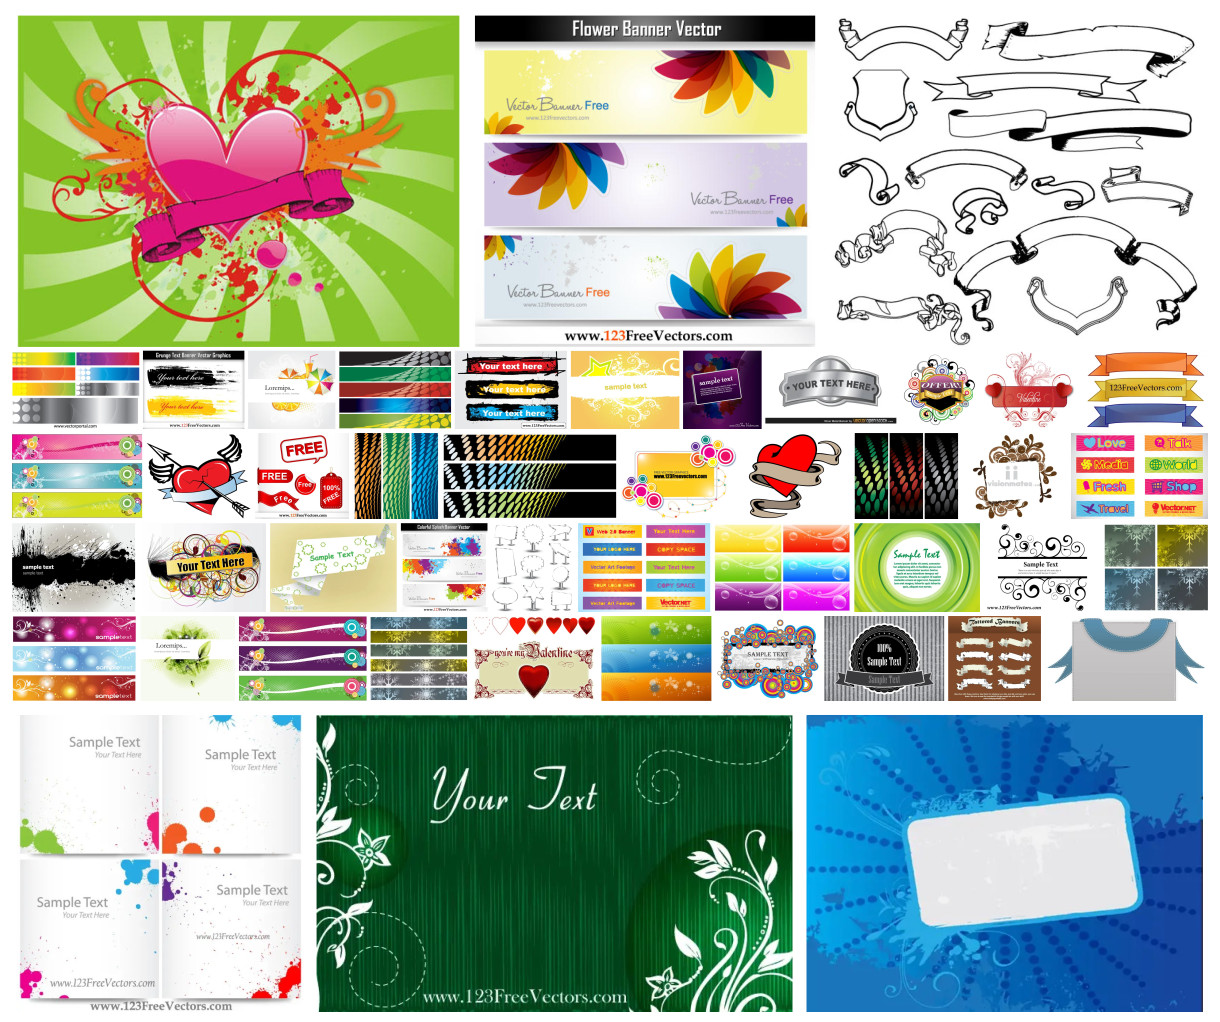 Dive into the Banners Vector: An Abstract & Colorful Design Fiesta